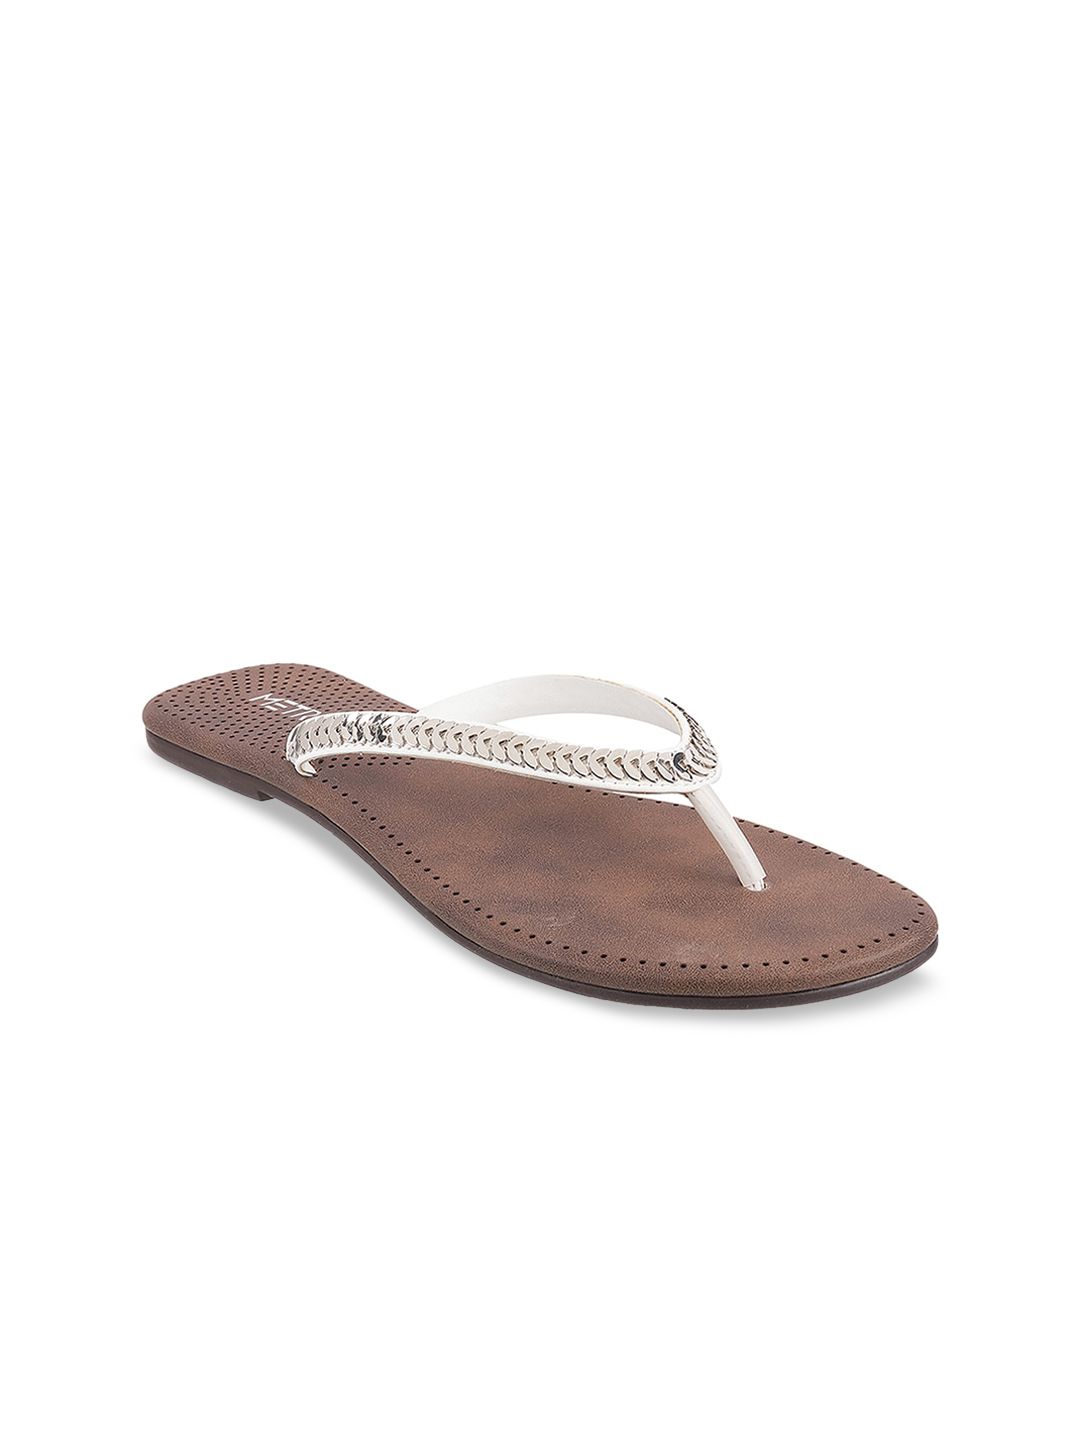 Metro Women White Embellished Flats T-Strap Flats Price in India